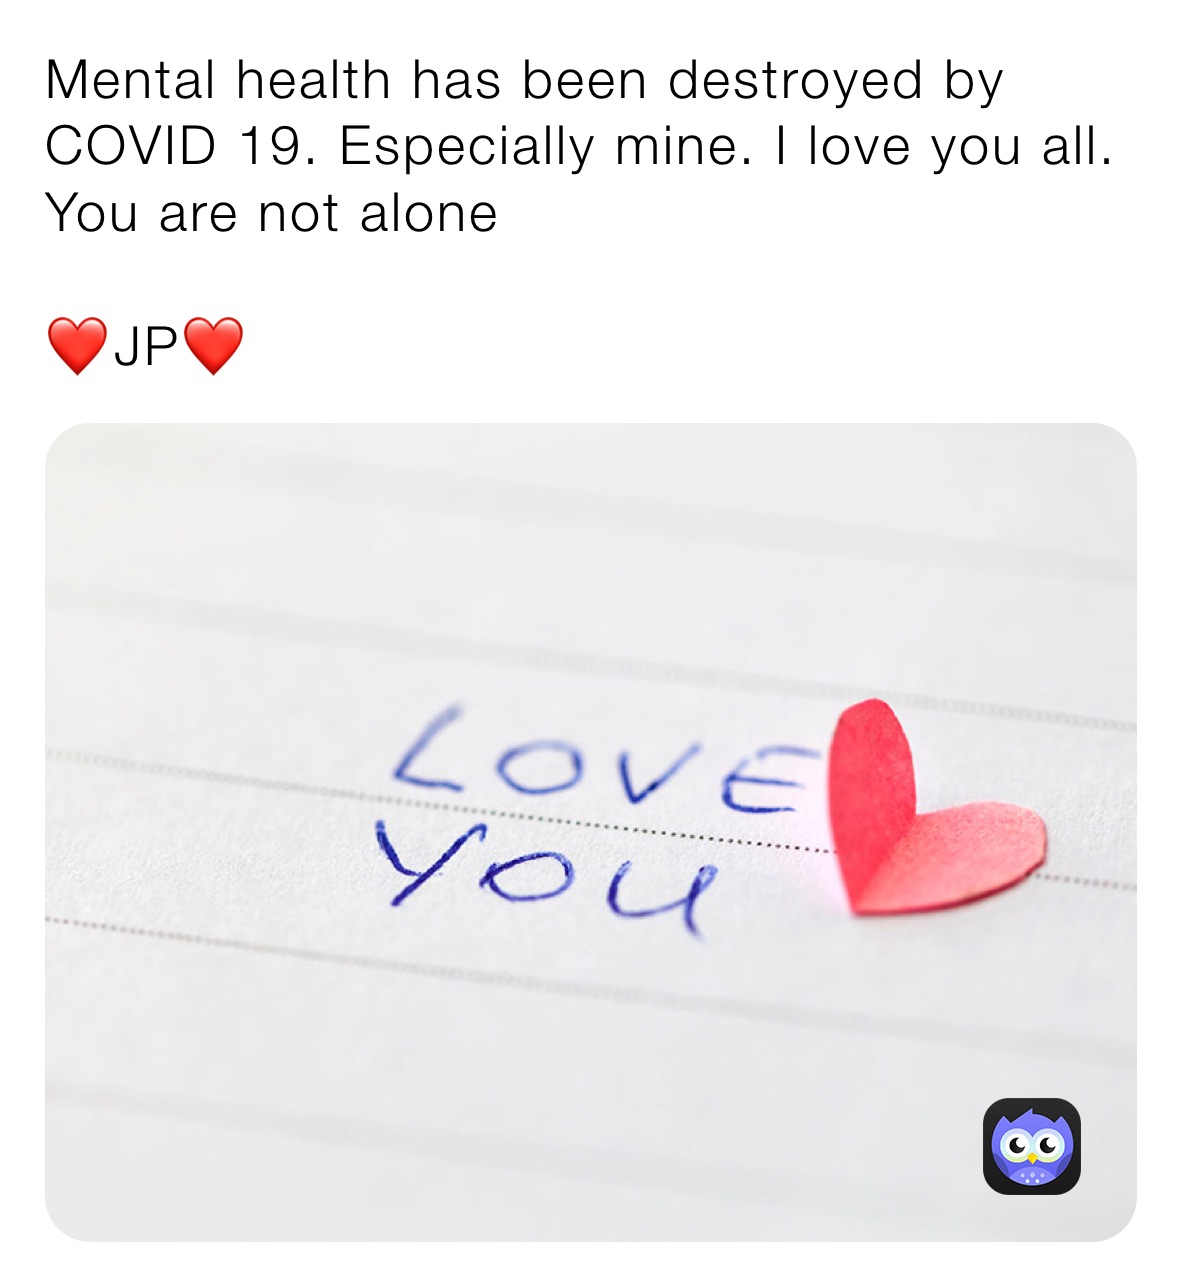 Mental health has been destroyed by COVID 19. Especially mine. I love you all. You are not alone 

❤️JP❤️